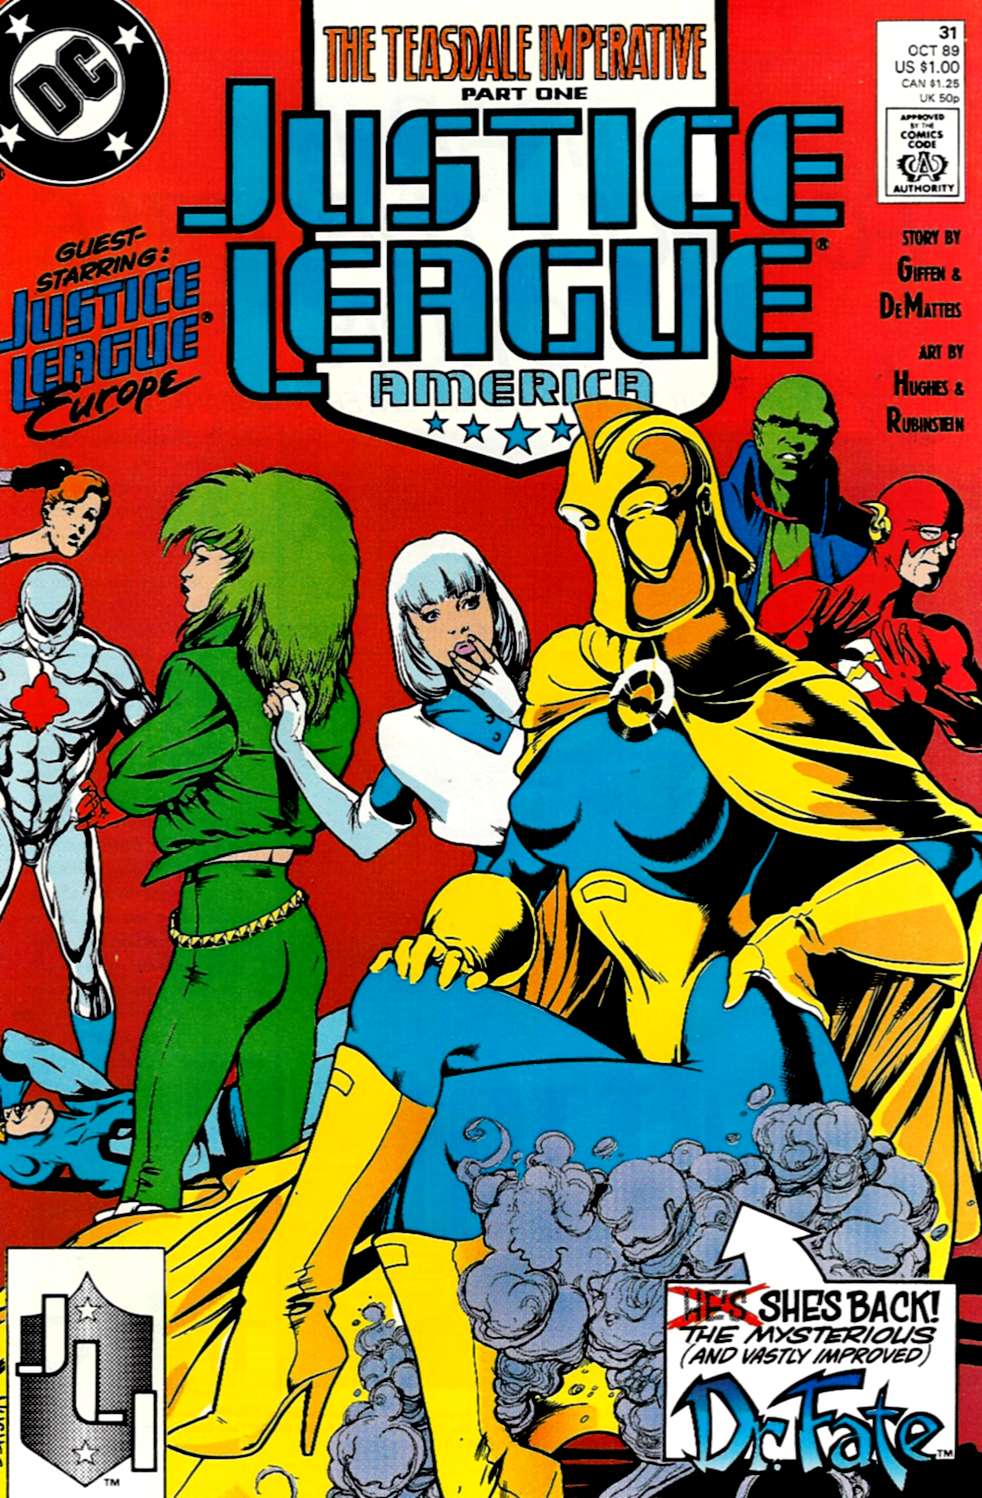 Read online Justice League America comic -  Issue #31 - 1